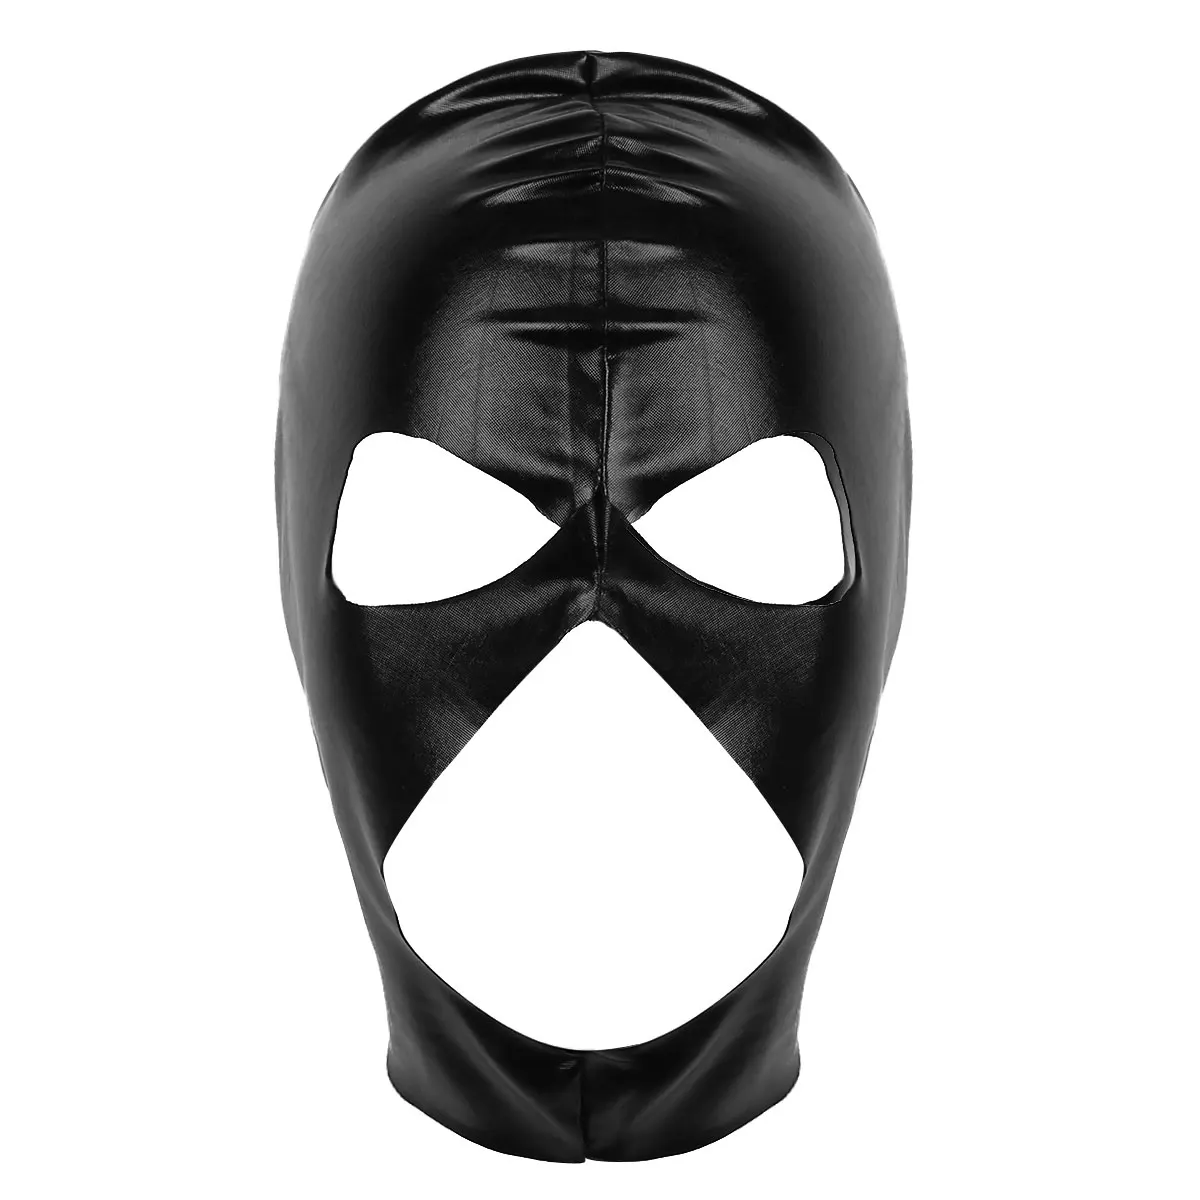 Black Open Mouth Full Head Face Cover Headgear Mask Hood Adult Role Play Costume 